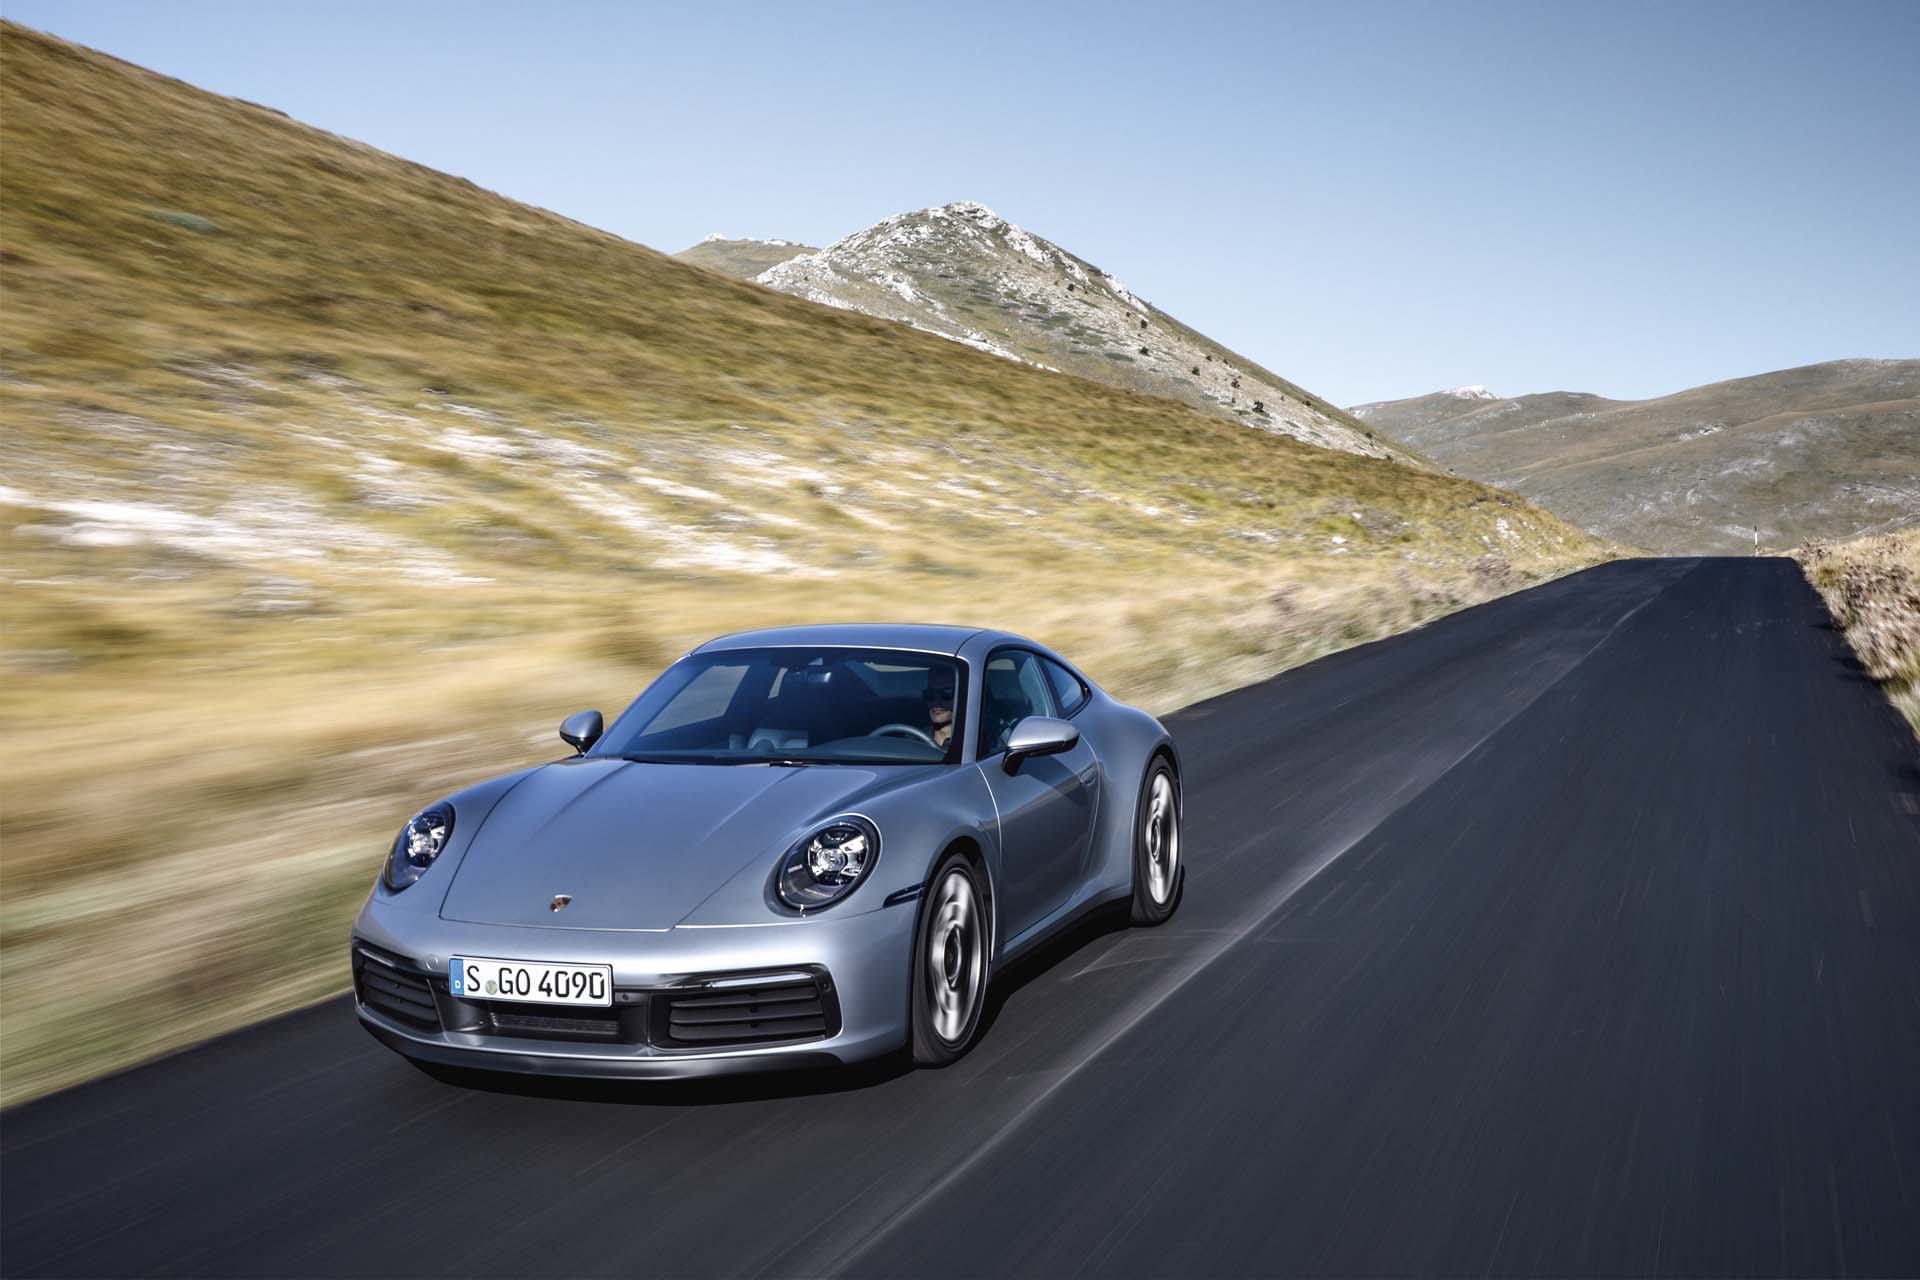 2020 Porsche 911 Carrera S laps 'Ring in 7:25, or 5 s faster than previous  generation